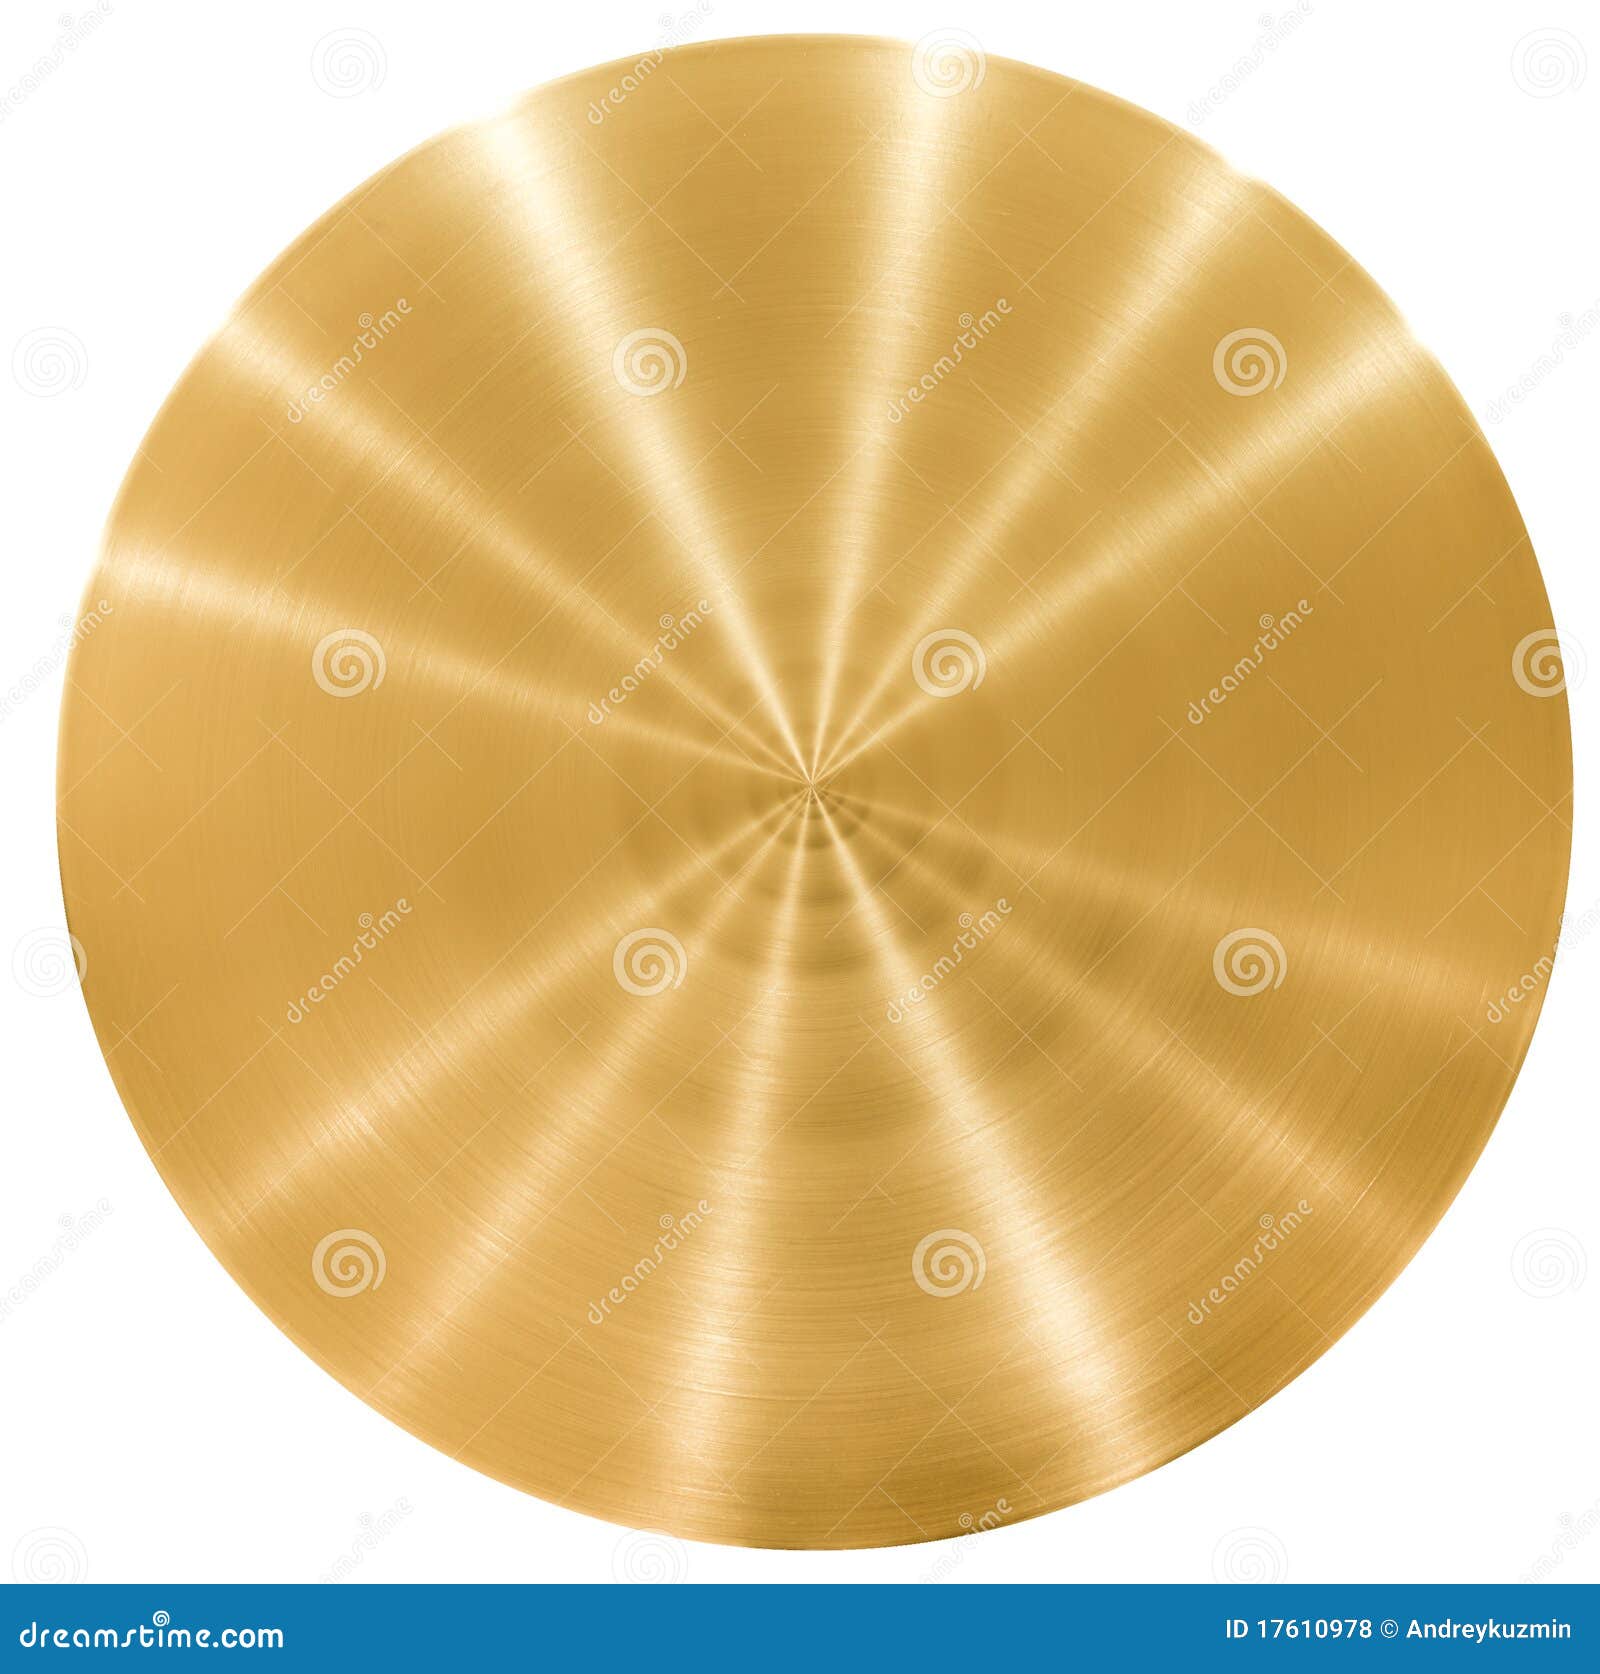 brass round metal plate or disk